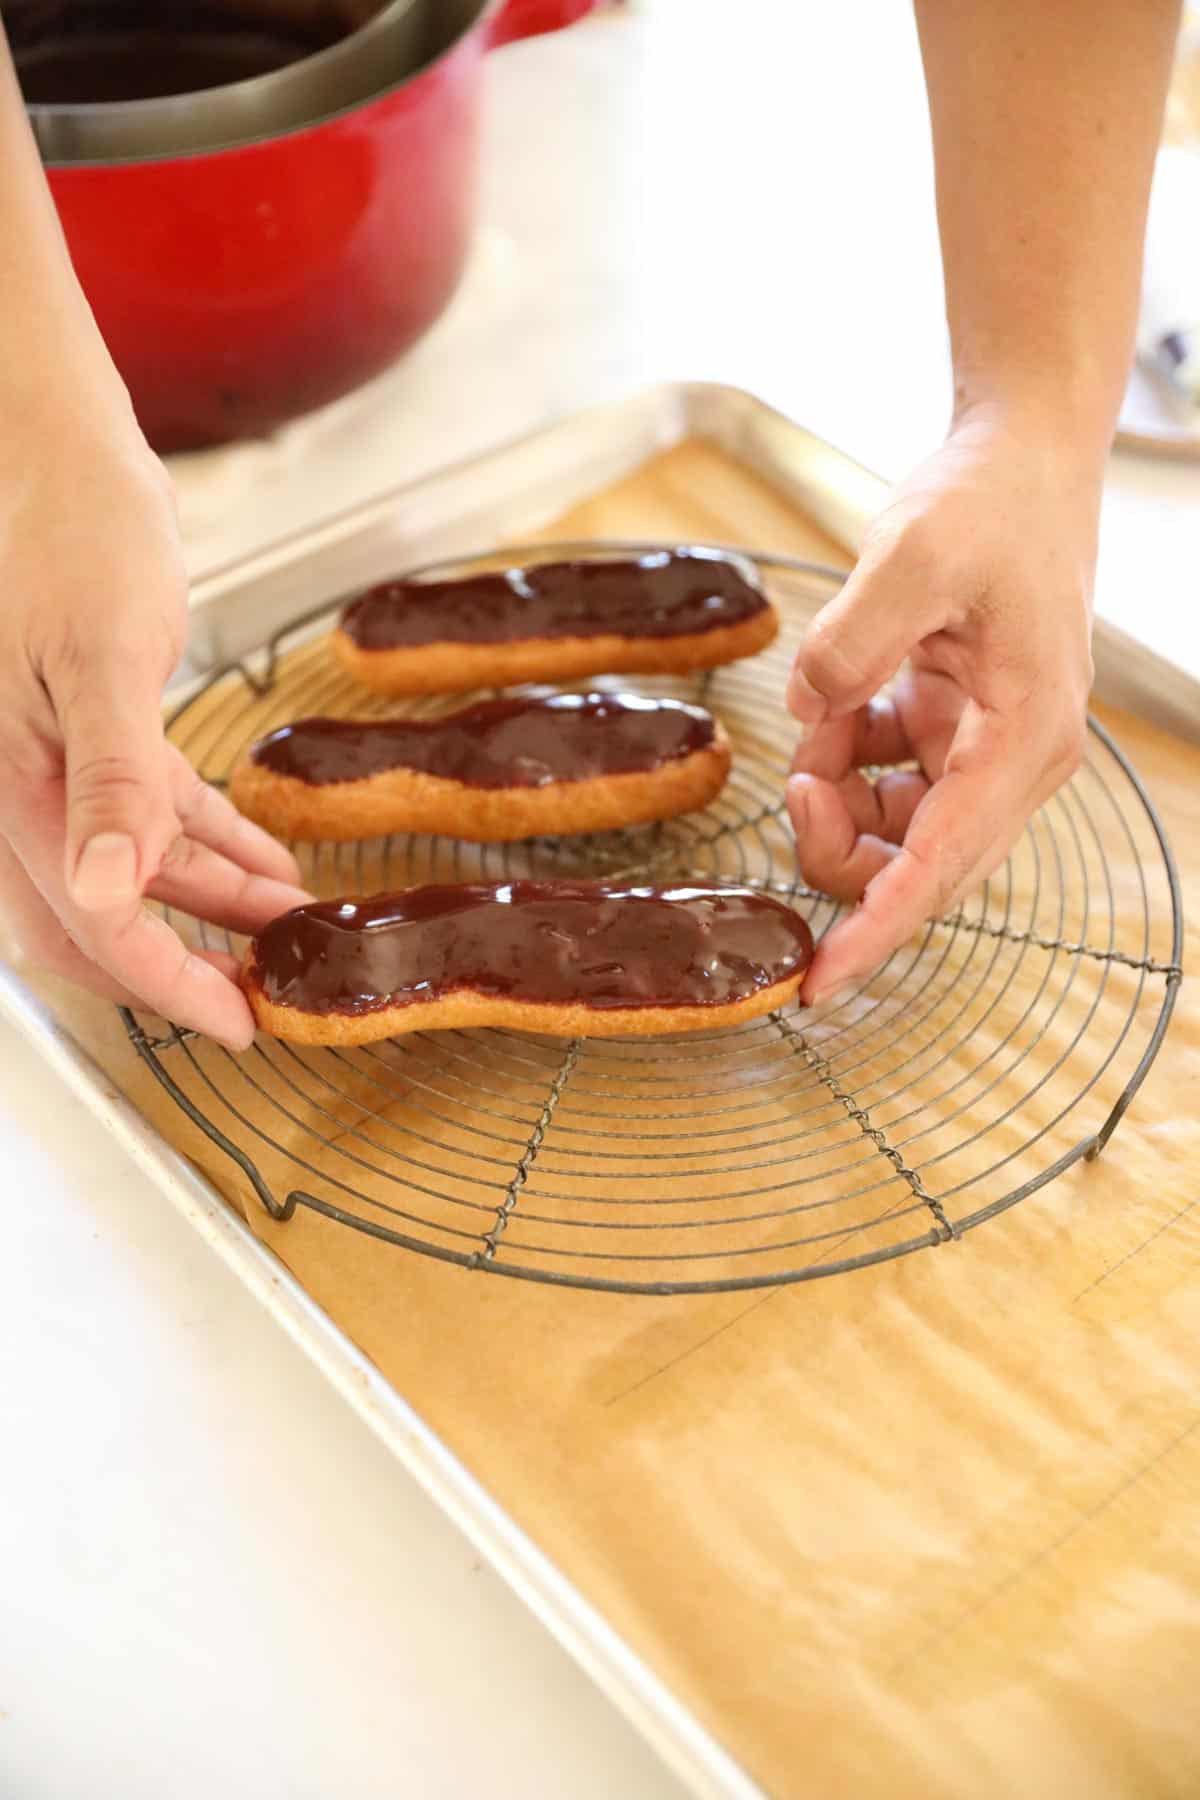 Placing glazed eclairs on a cooling rack